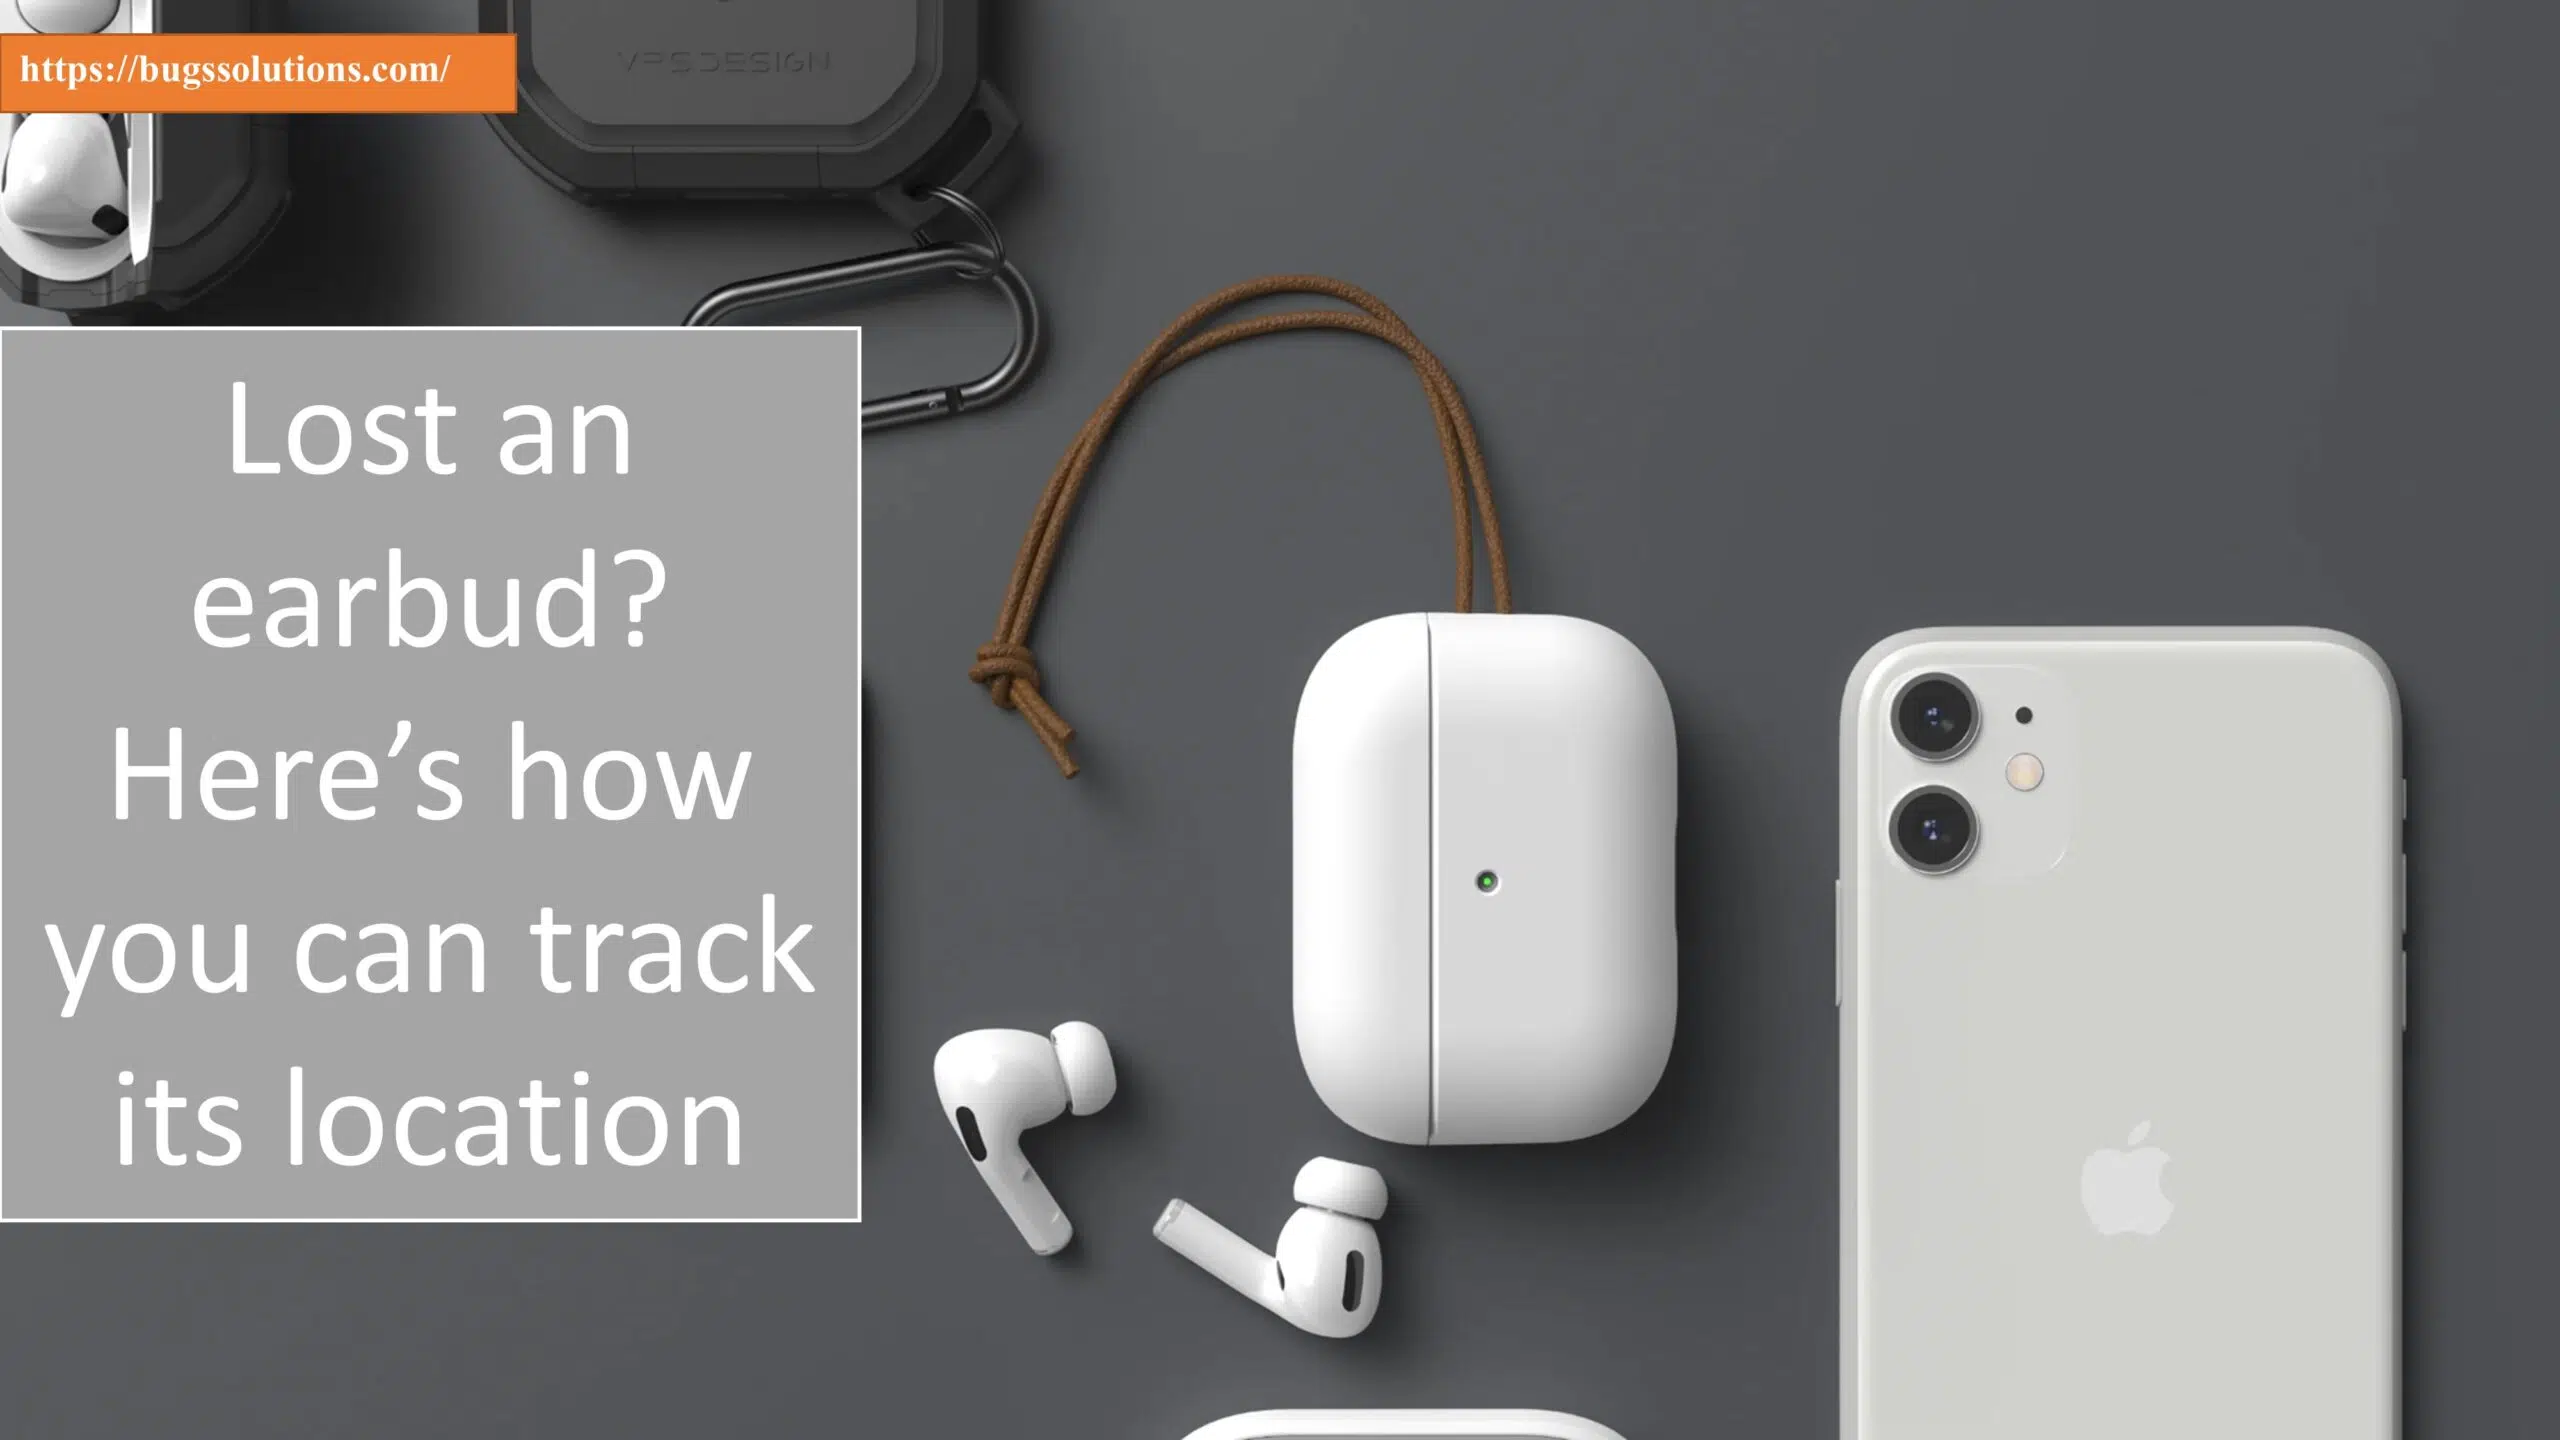 Dropped an earbud? Here’s how you can track its location Lost earbud - Bugs Solutions